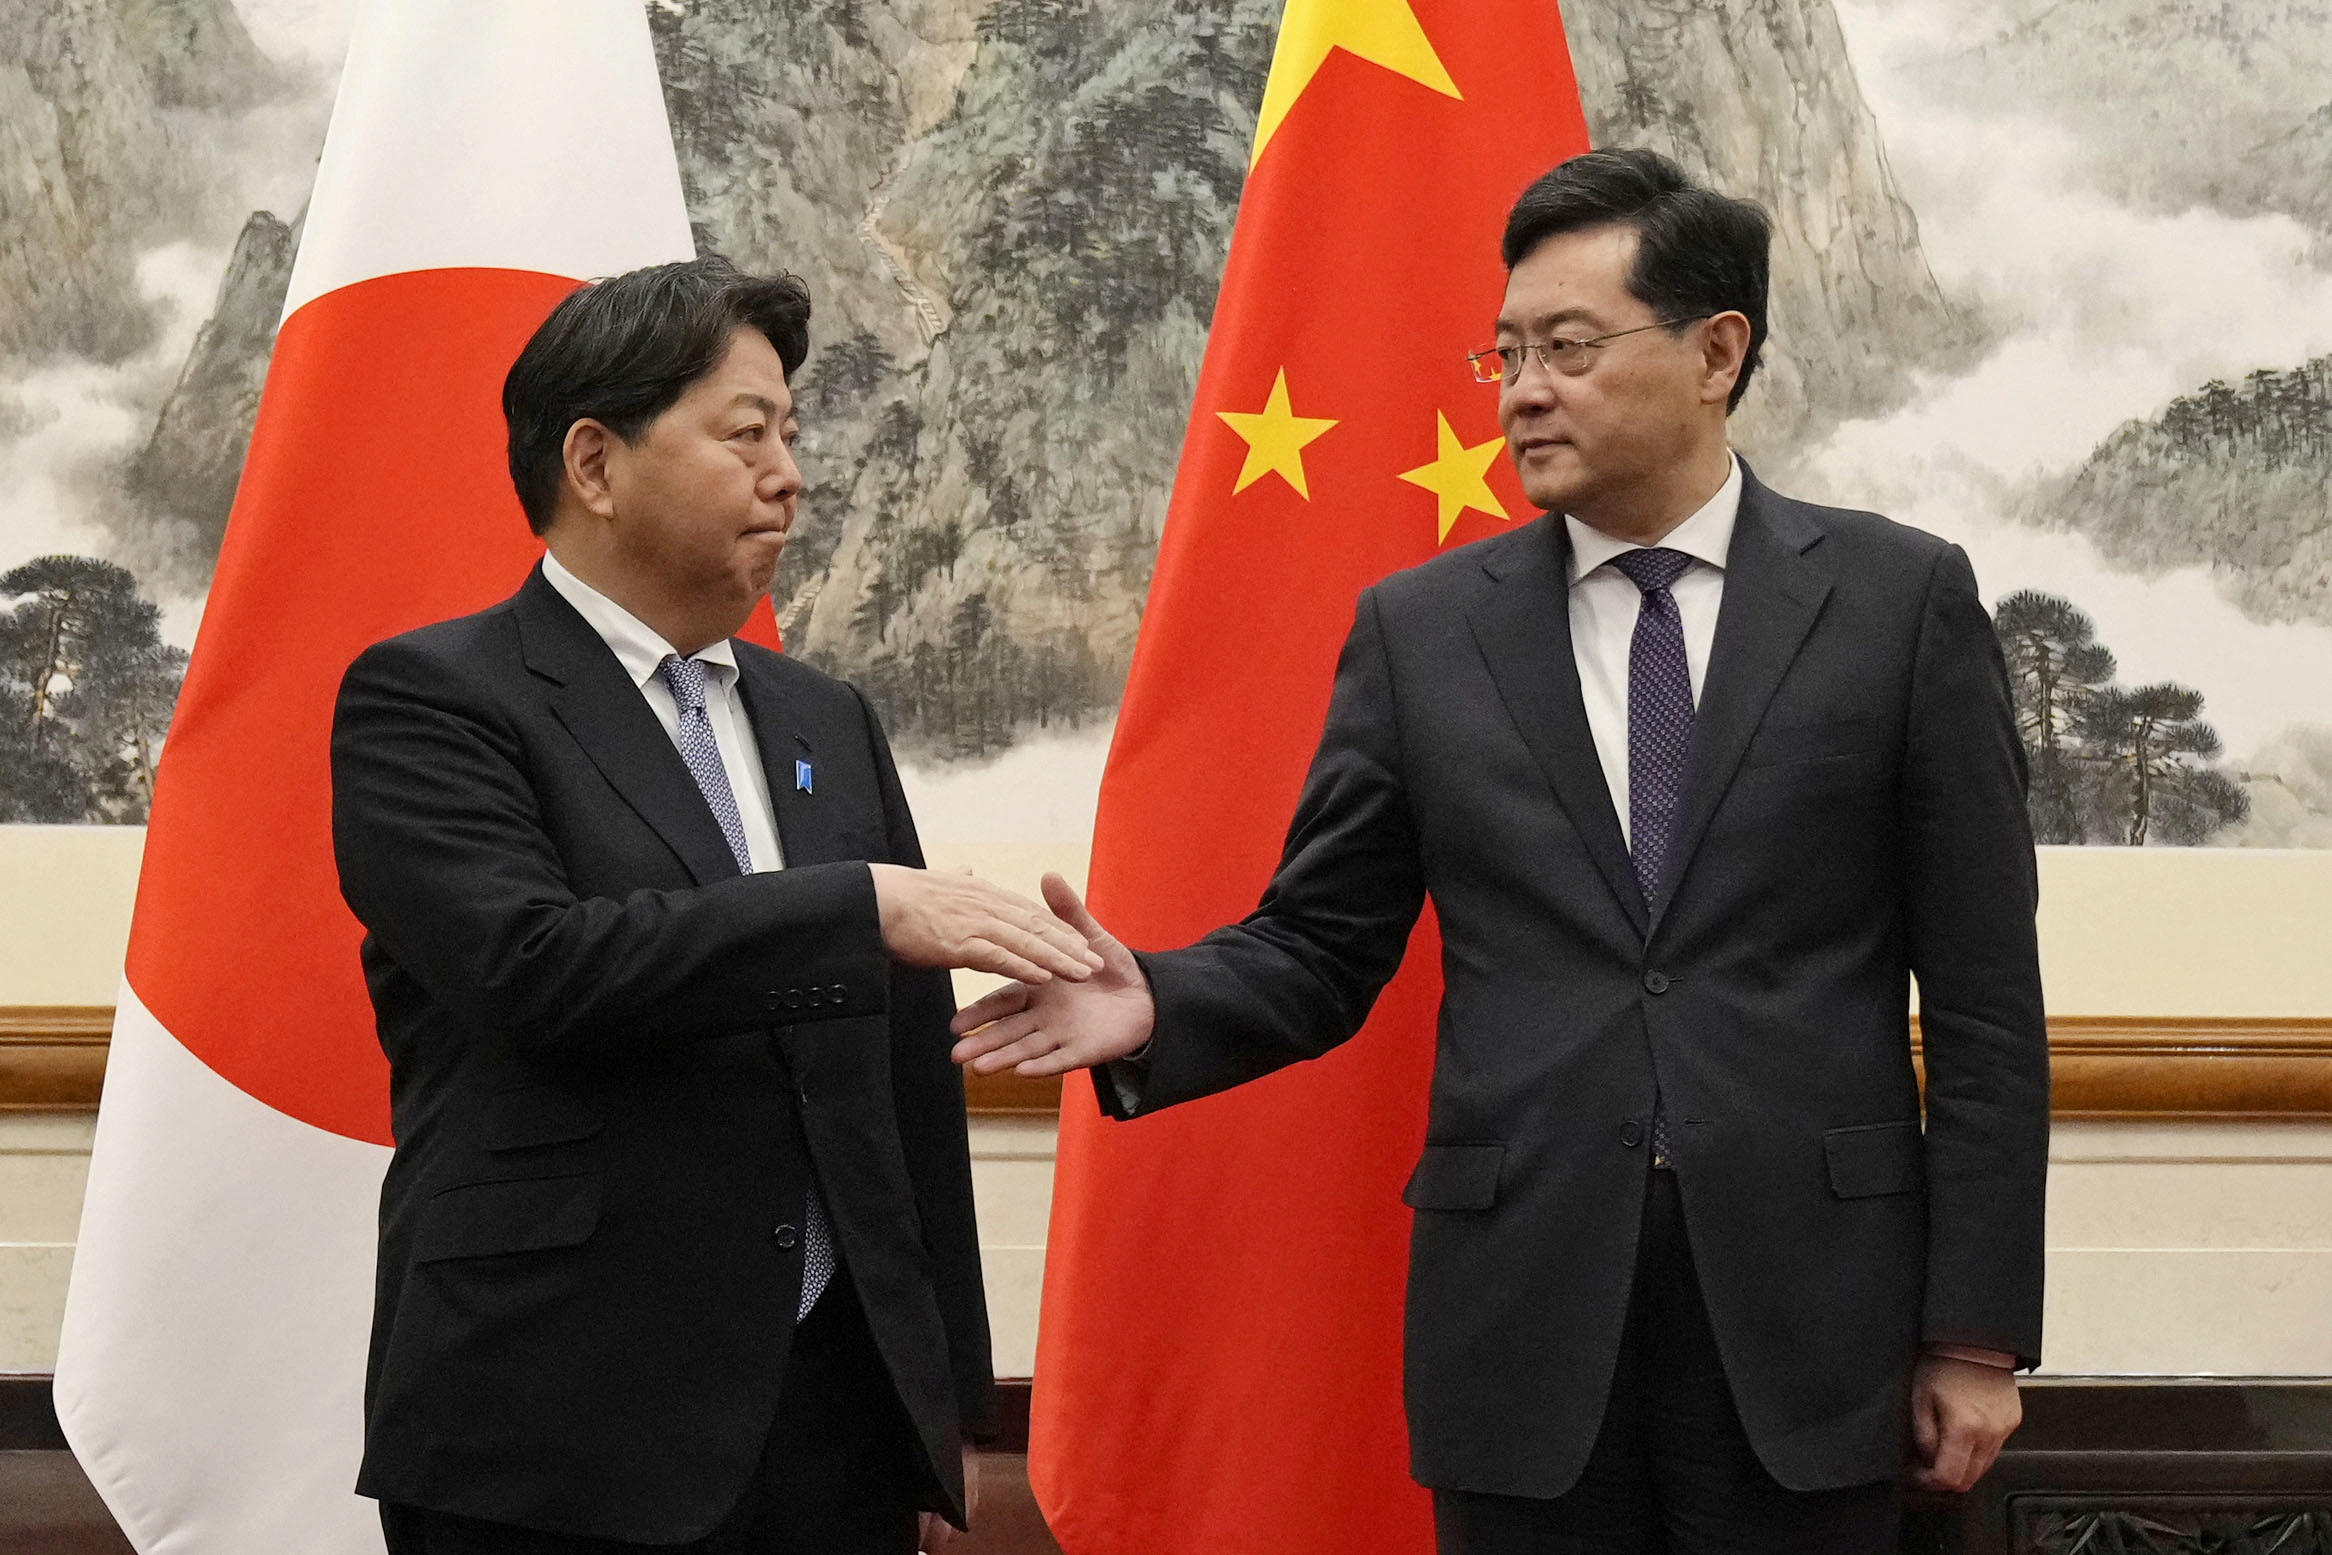 Japan's foreign minister Yoshimasa Hayashi meets Chinese Foreign Minister Qin Gang in Beijing